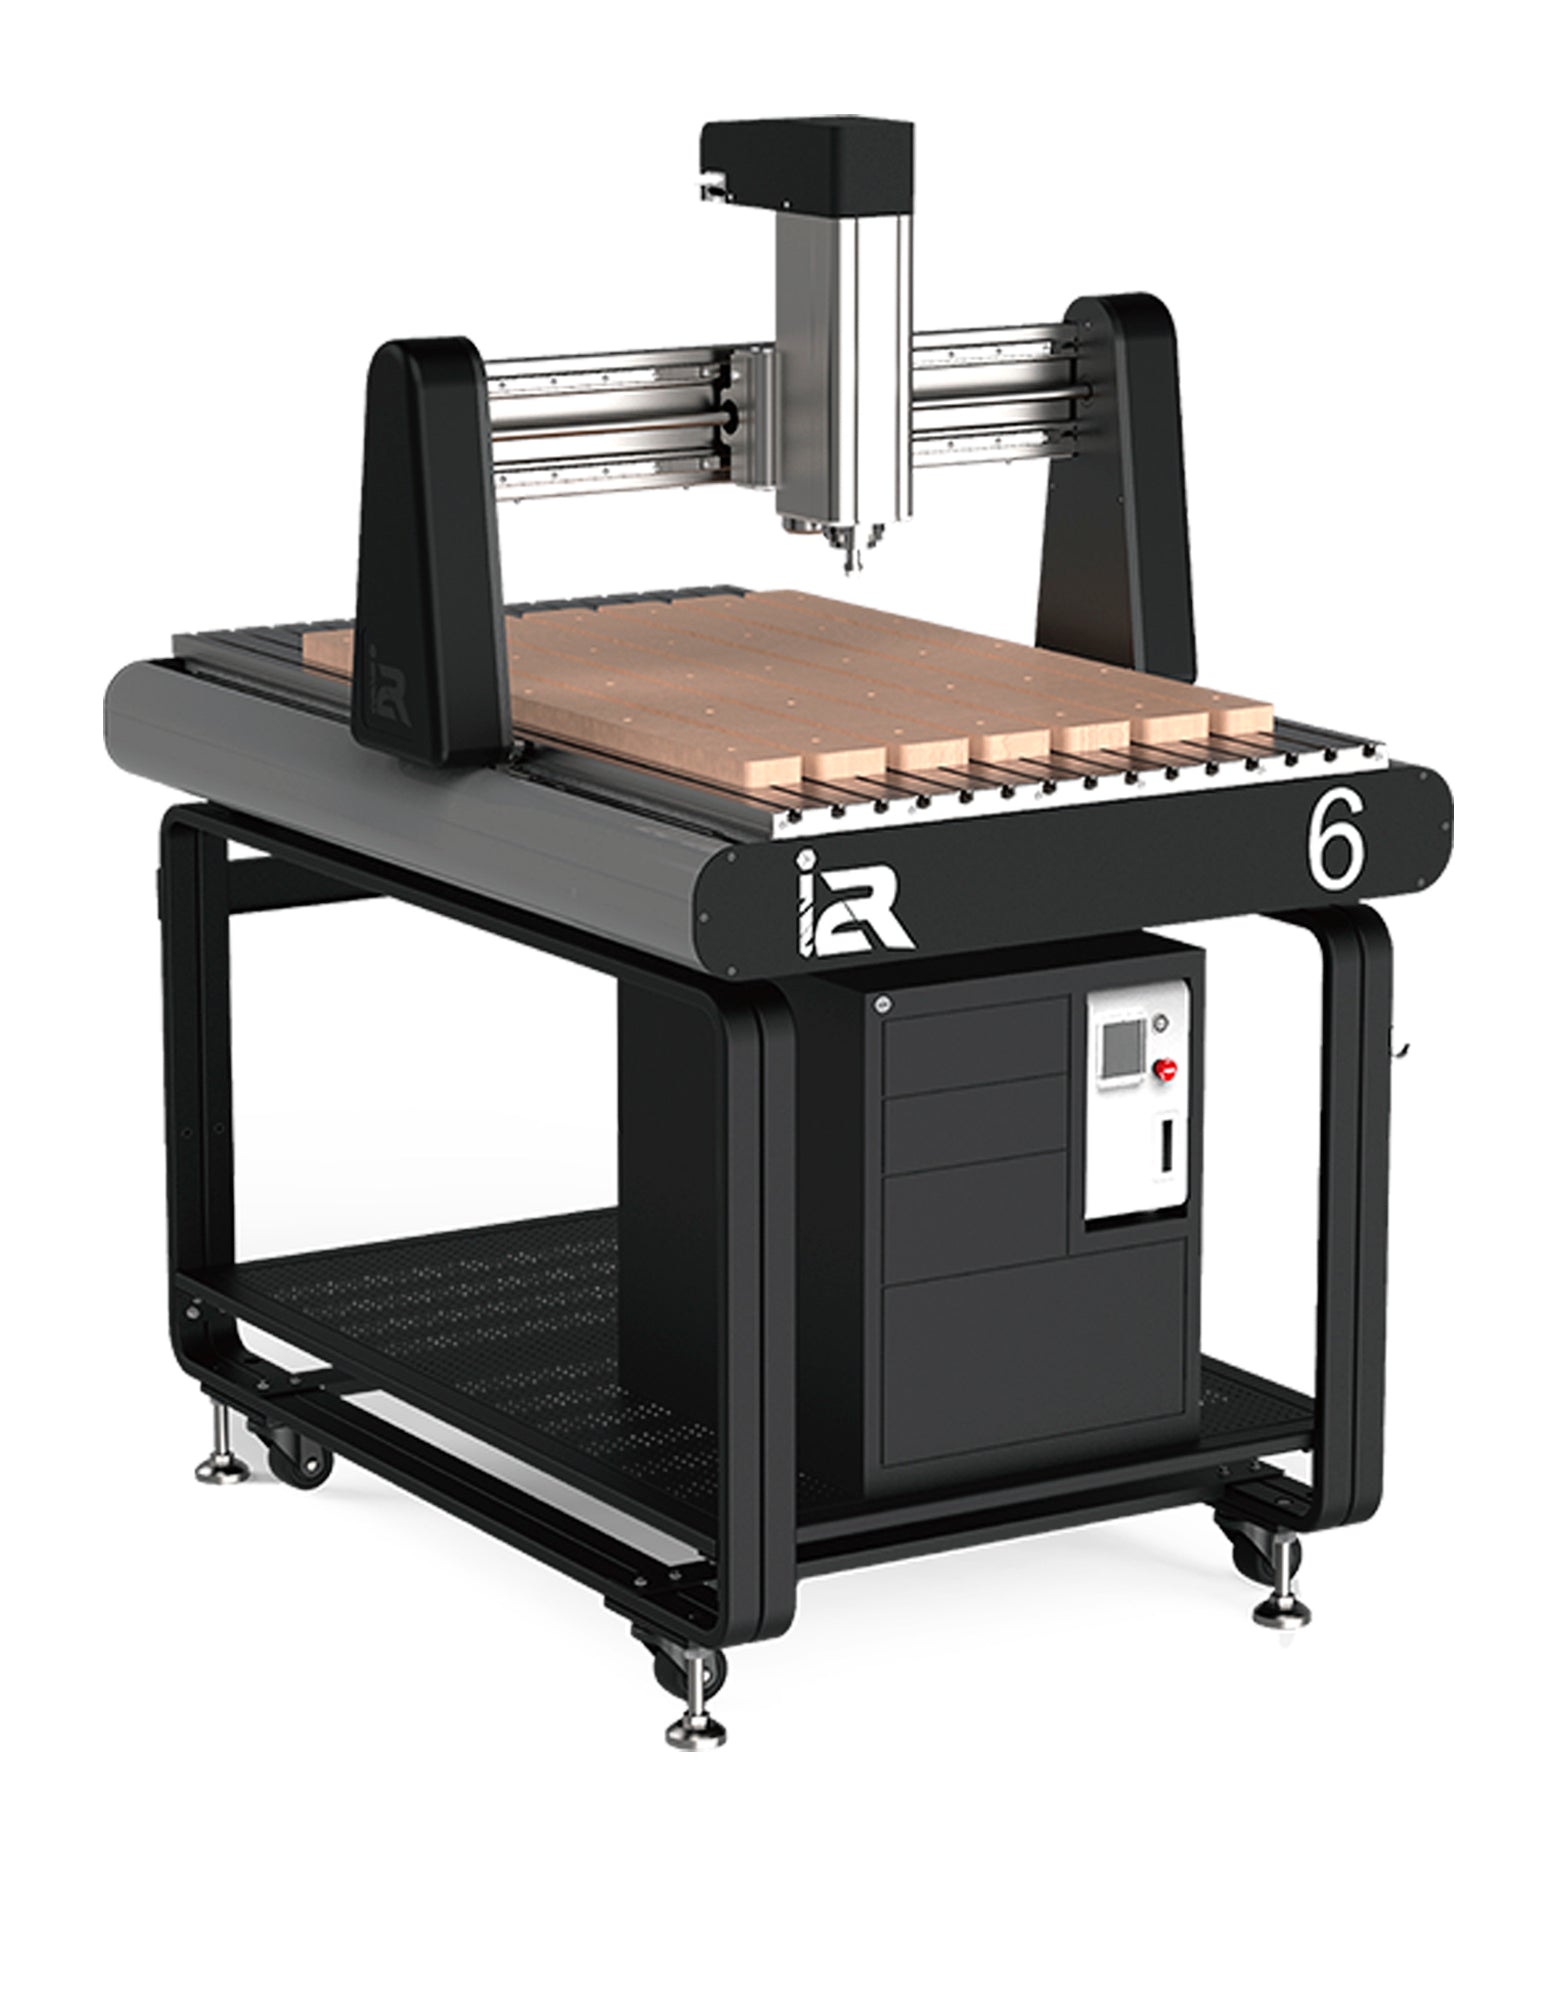 I2R 6 CNC - Ultimate 3D Printing Store